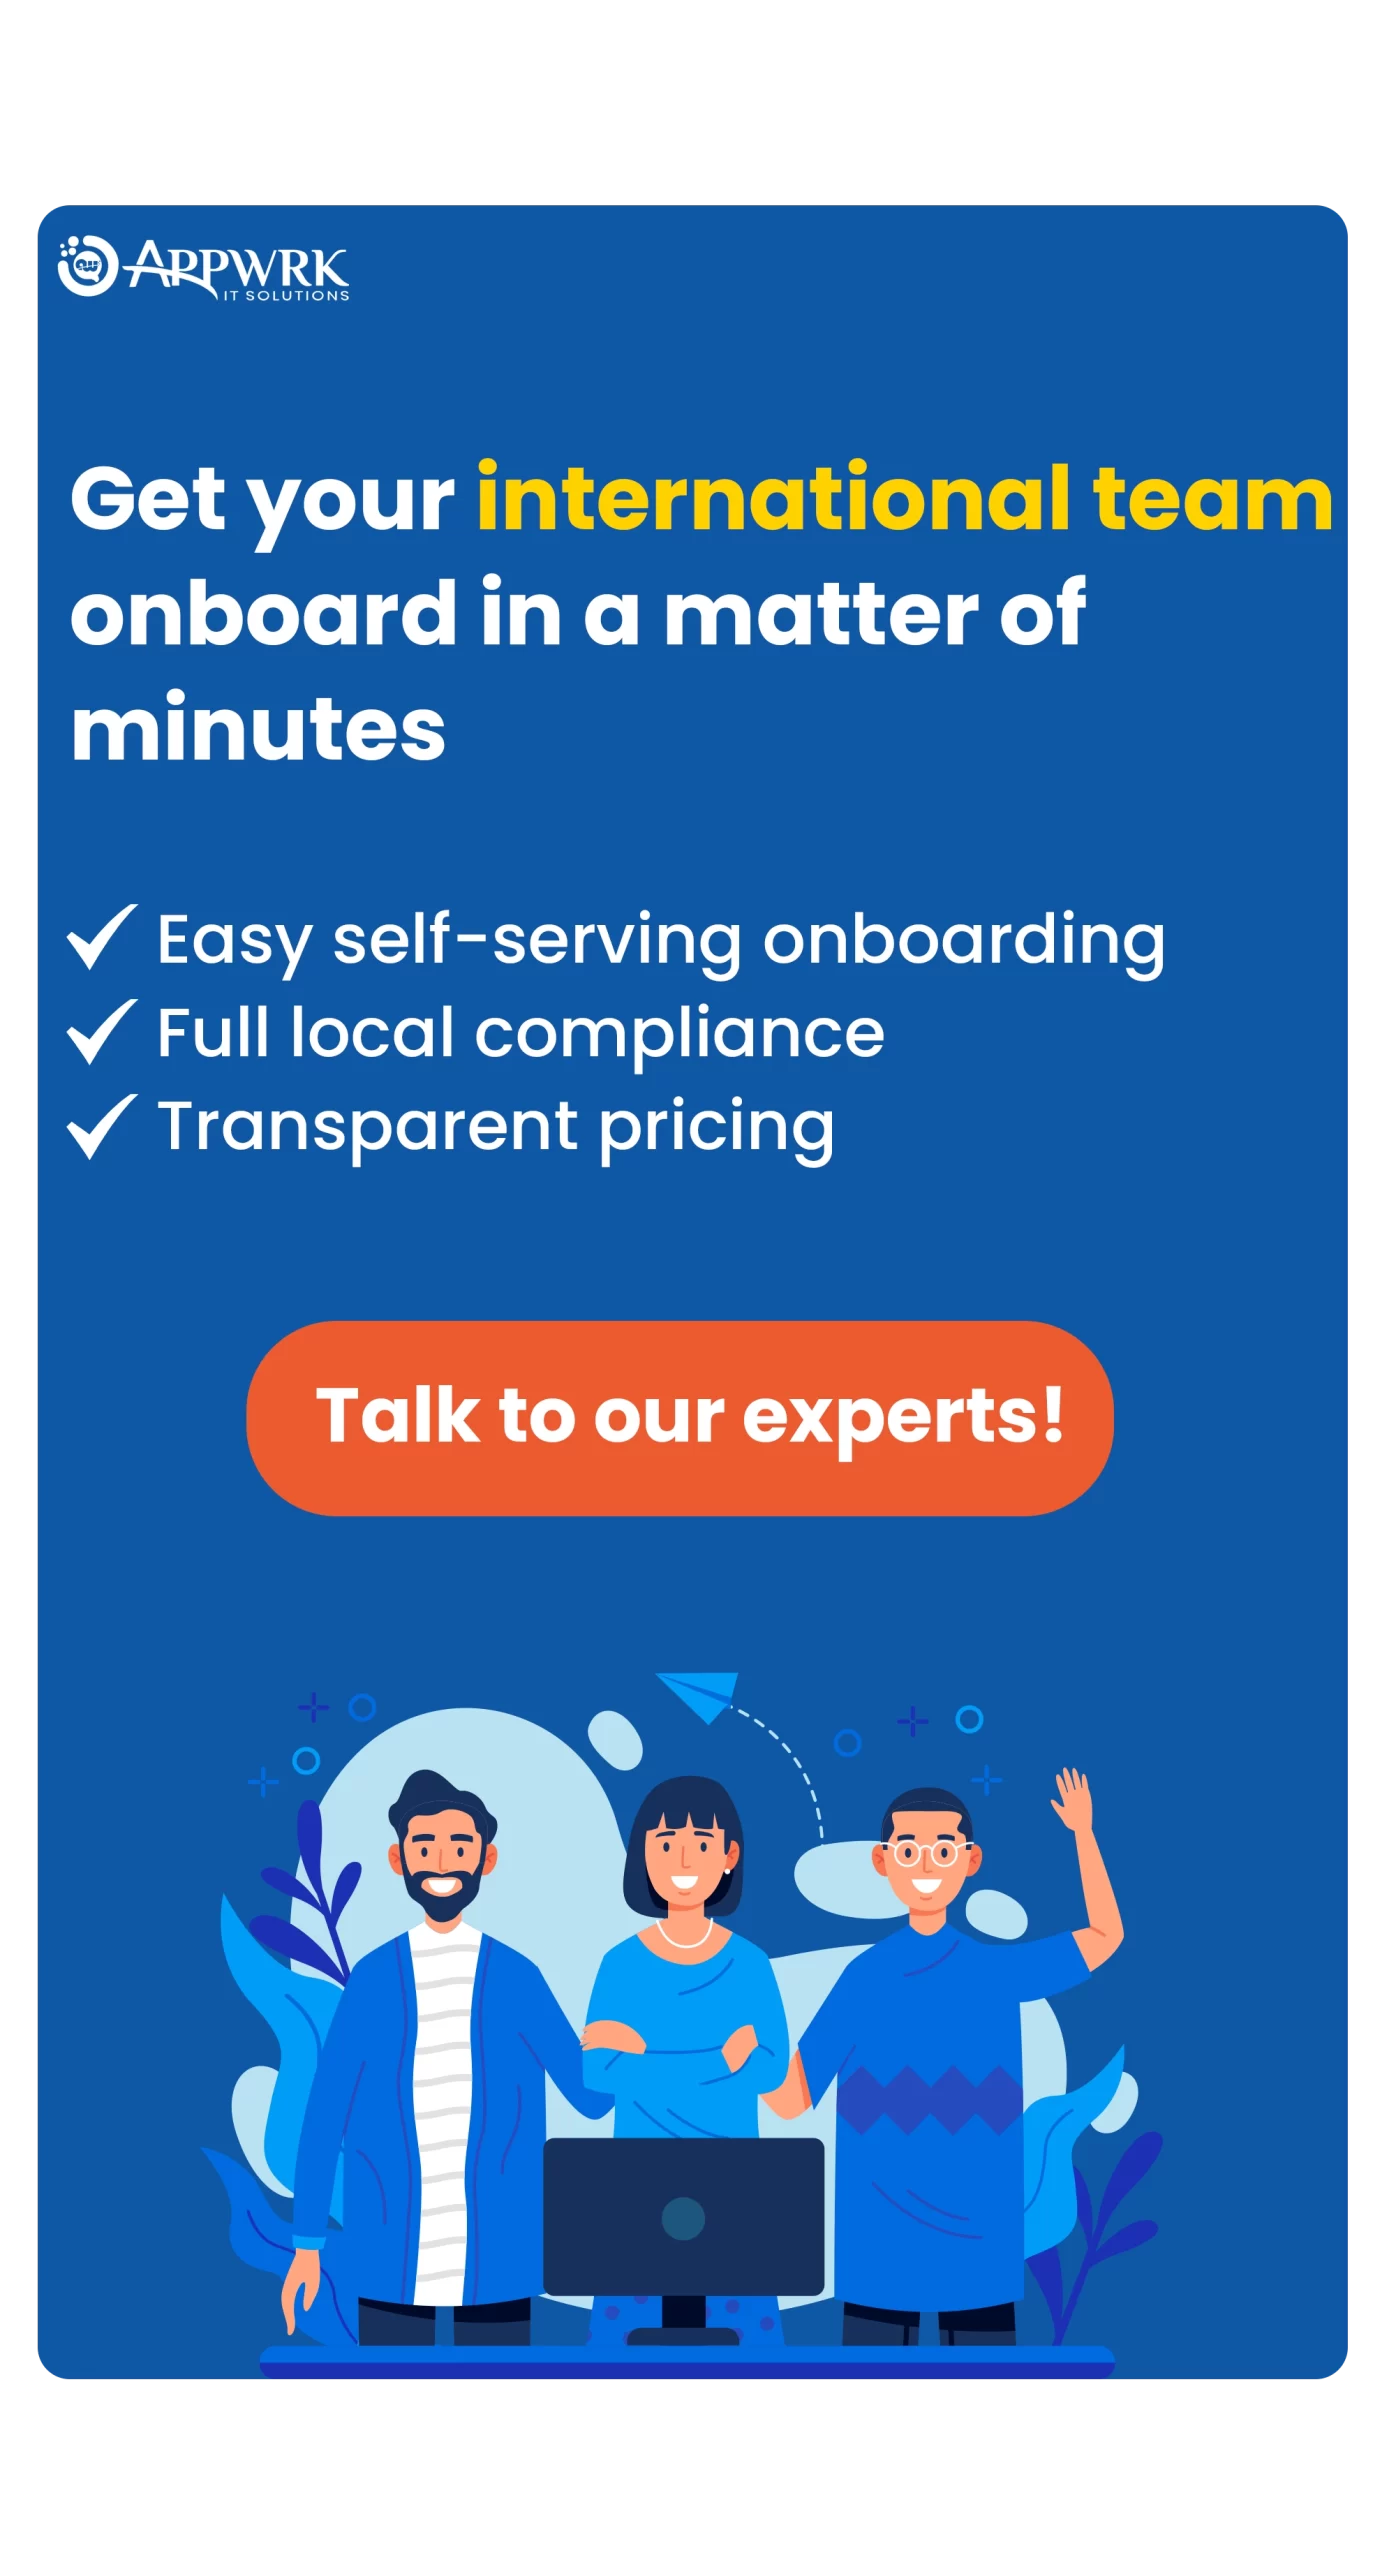 Get your international team onboard in a matter of minutes